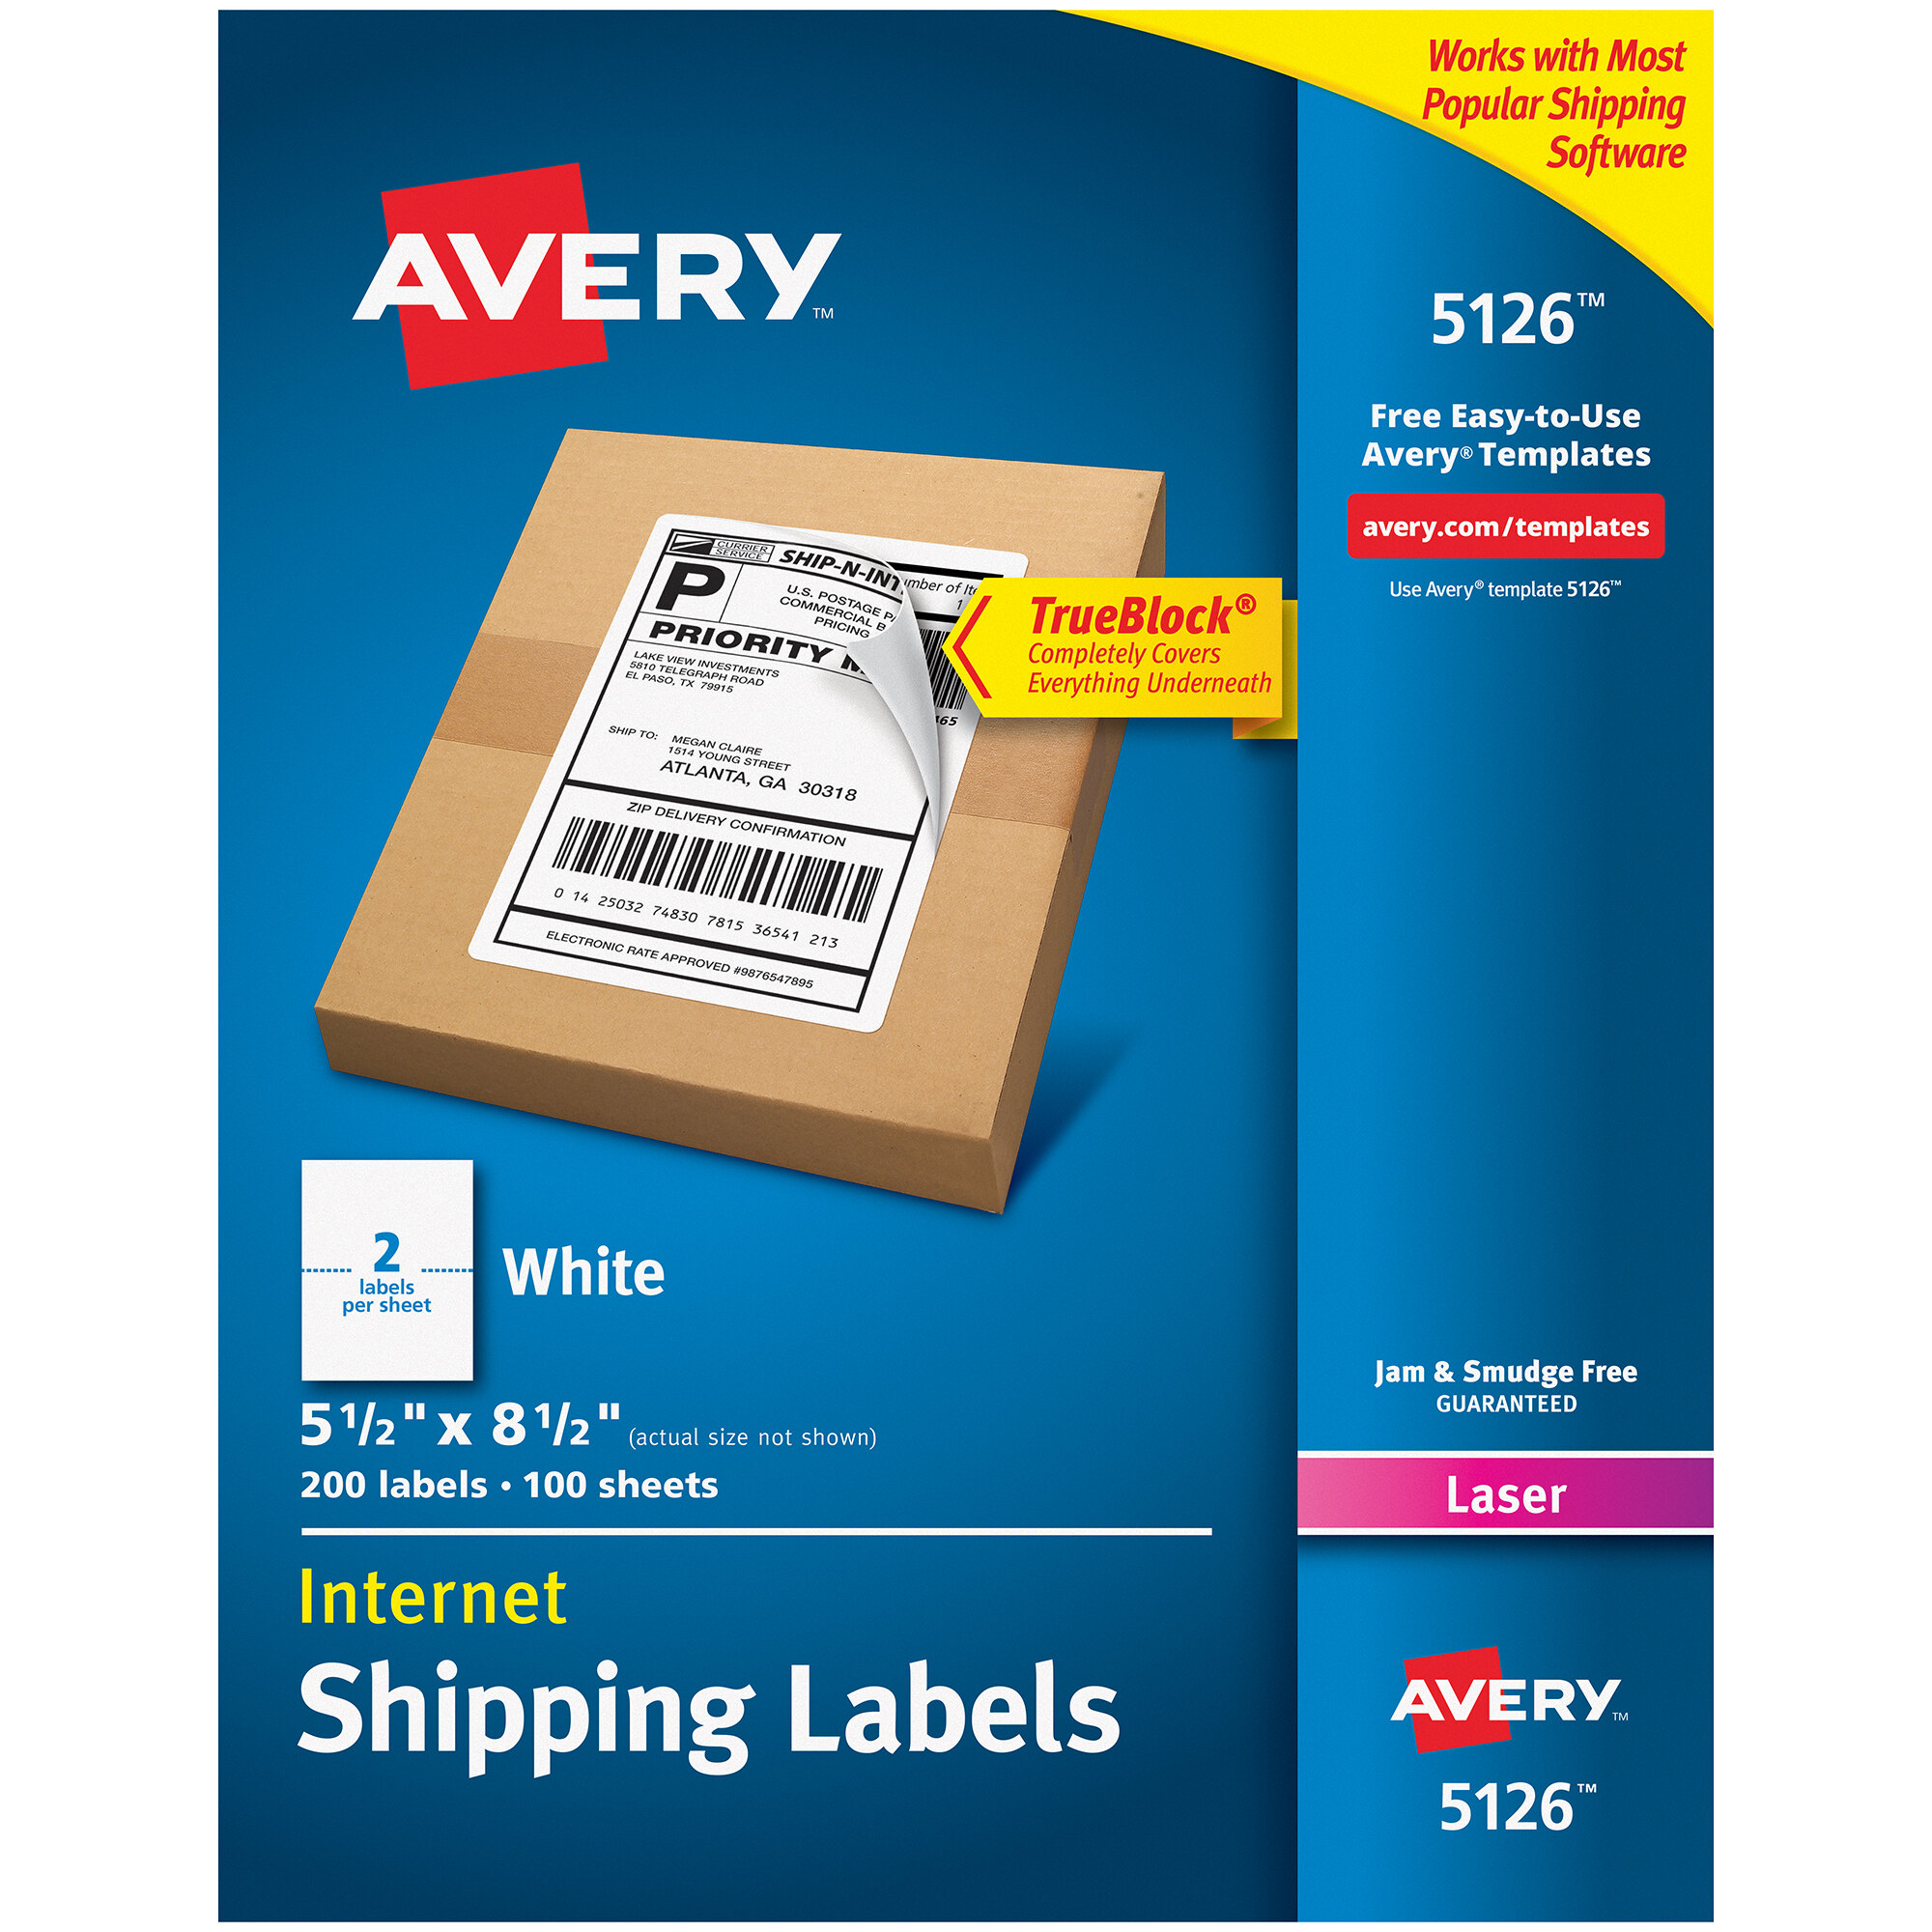 Avery 5126 5 1/2" x 8 1/2" White Shipping Labels 200/Box